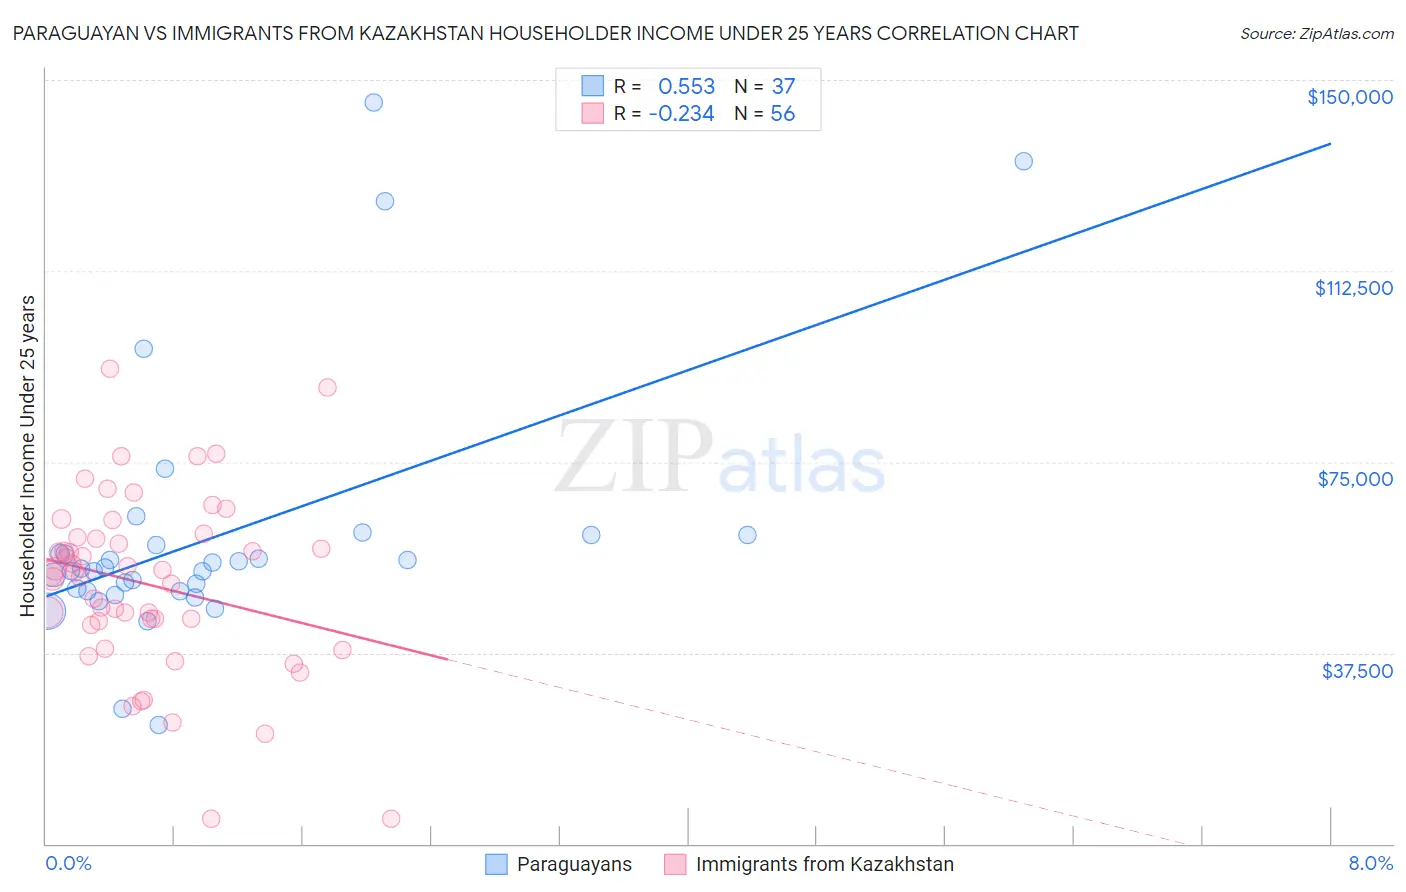 Paraguayan vs Immigrants from Kazakhstan Householder Income Under 25 years